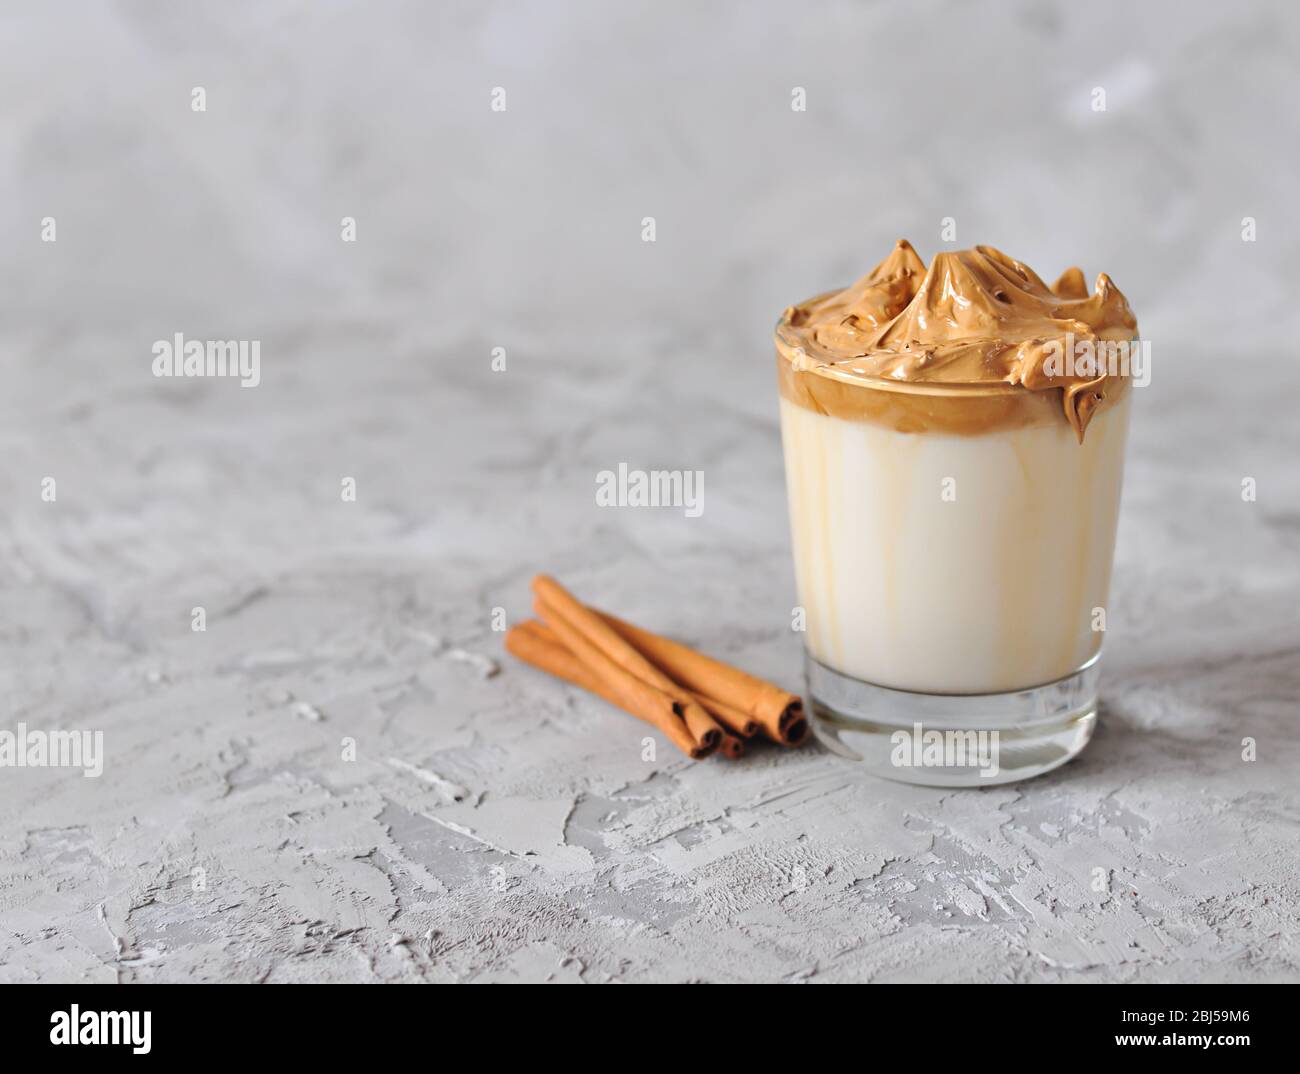 Homemade Dalgona coffee in glass . Recipe popular Korean drink latte with foam of instant coffee. Created new drink during Quarantine and self-isolati Stock Photo